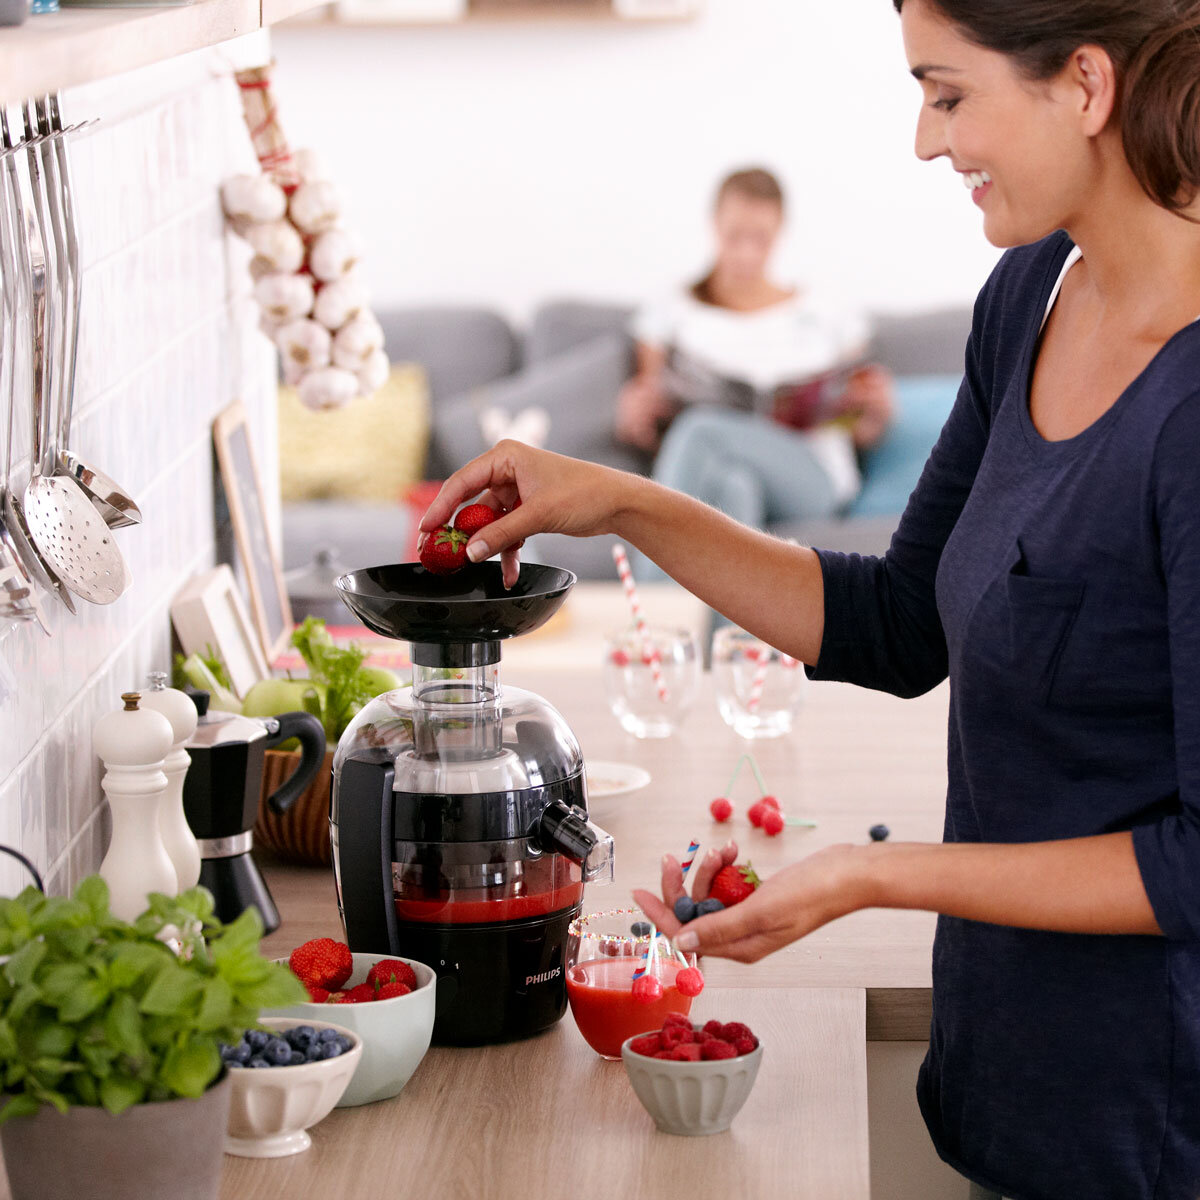 Lifestyle image woman with juicer